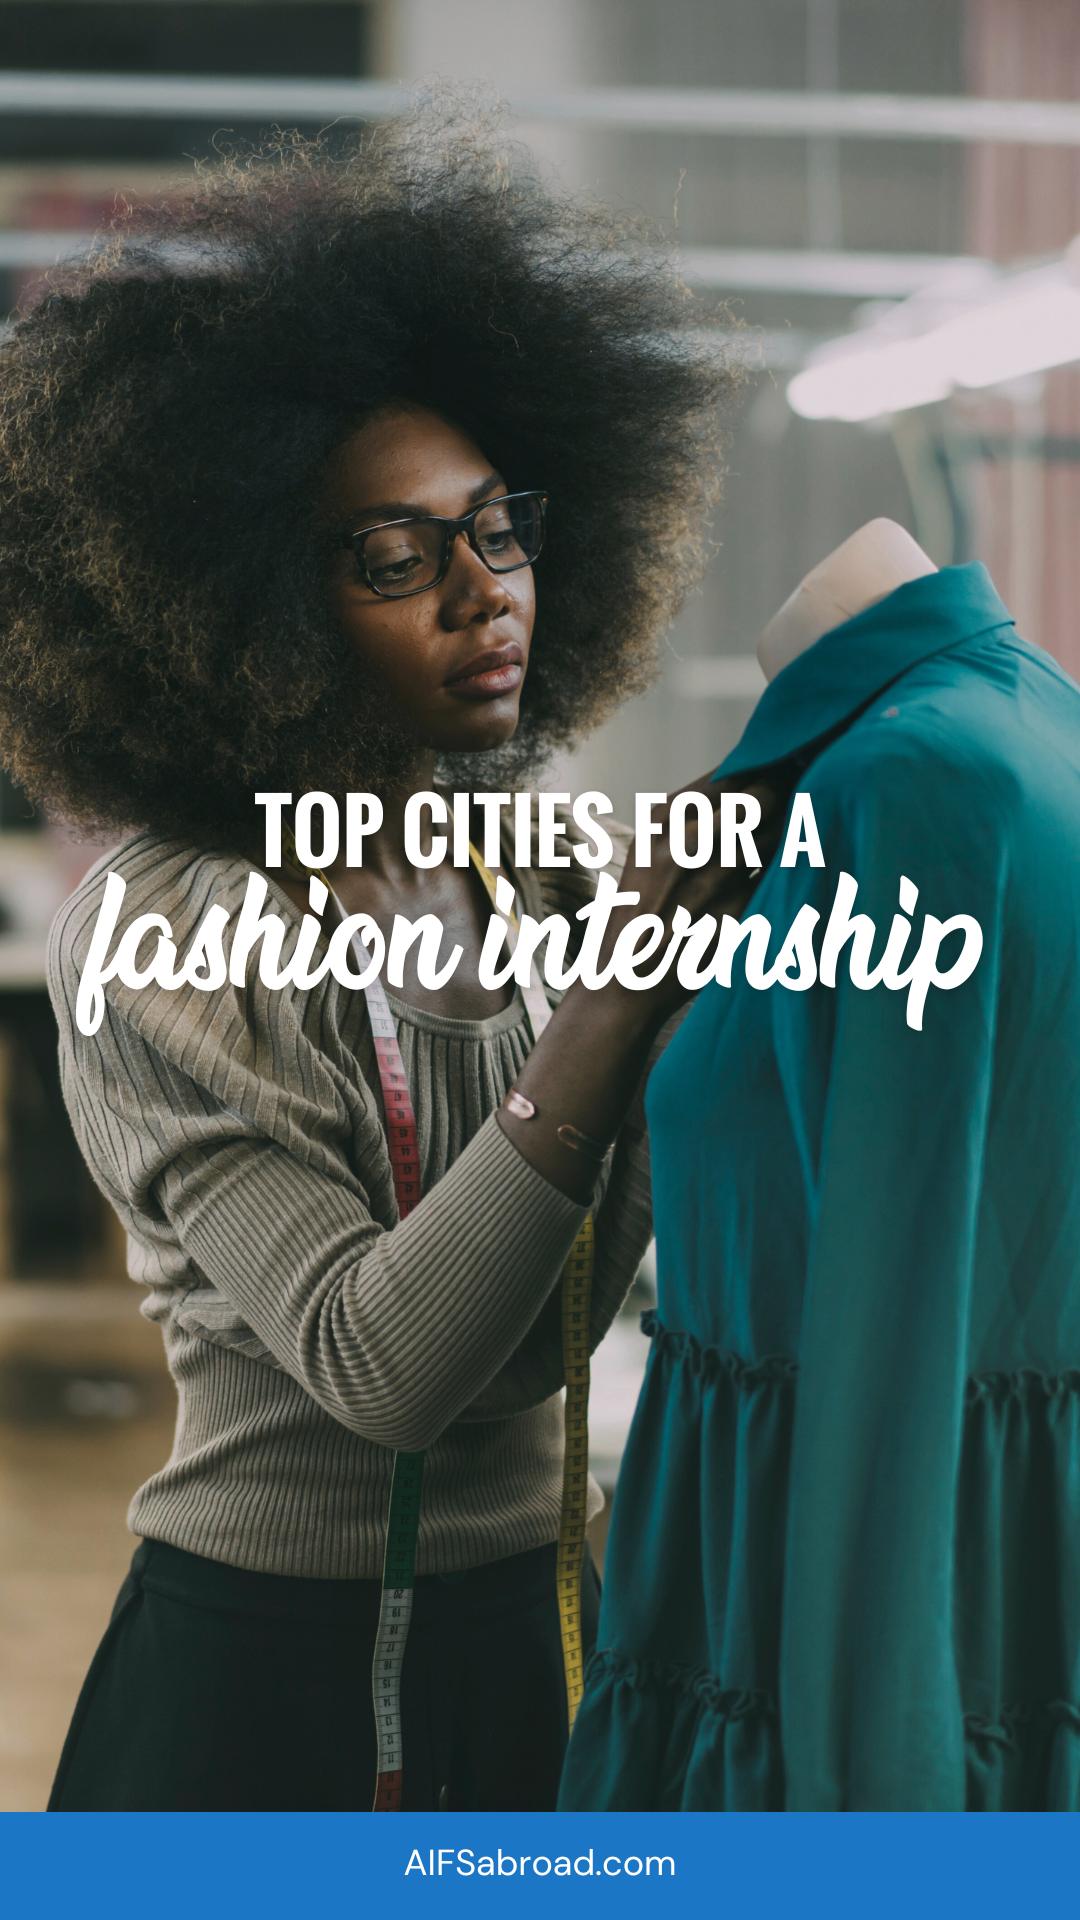 Young woman working on a garment with text overlay "Top Cities Around the World for a Fashion Internship - AIFS Abroad" - Pin Image